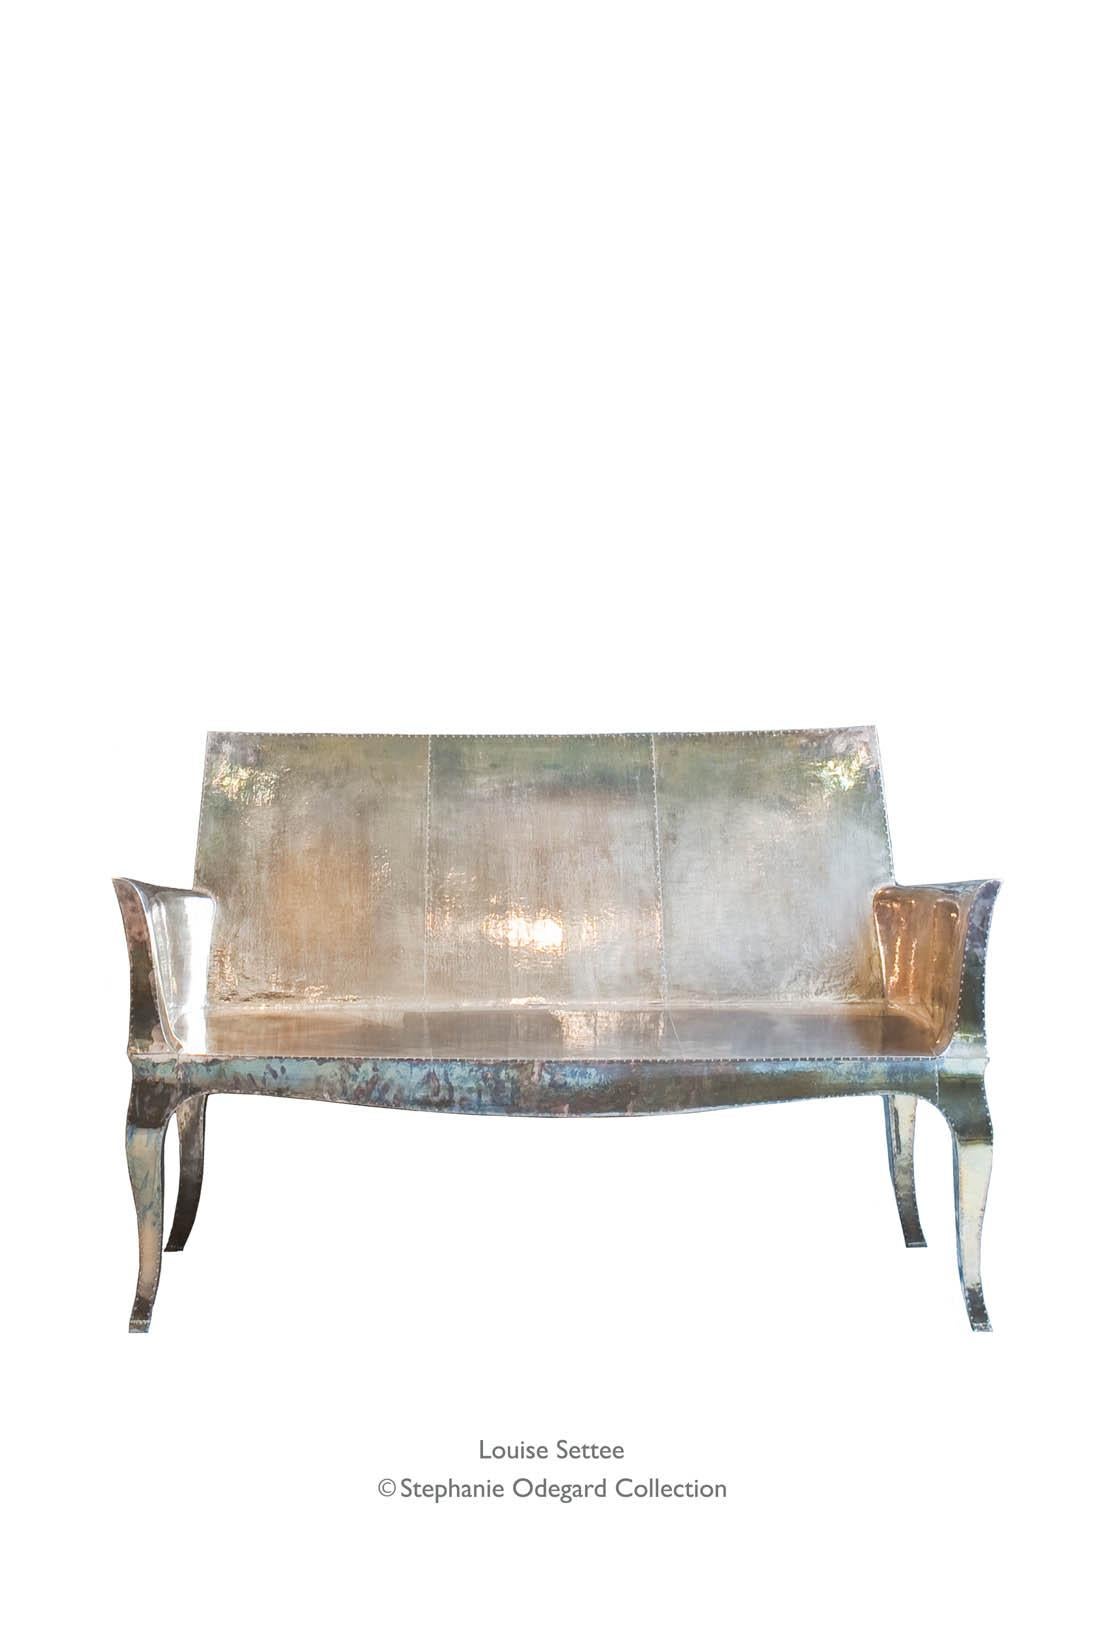 Louise Settee Art Deco Loveseats in Mid. Hammered Brass by Paul Mathieu For Sale 6